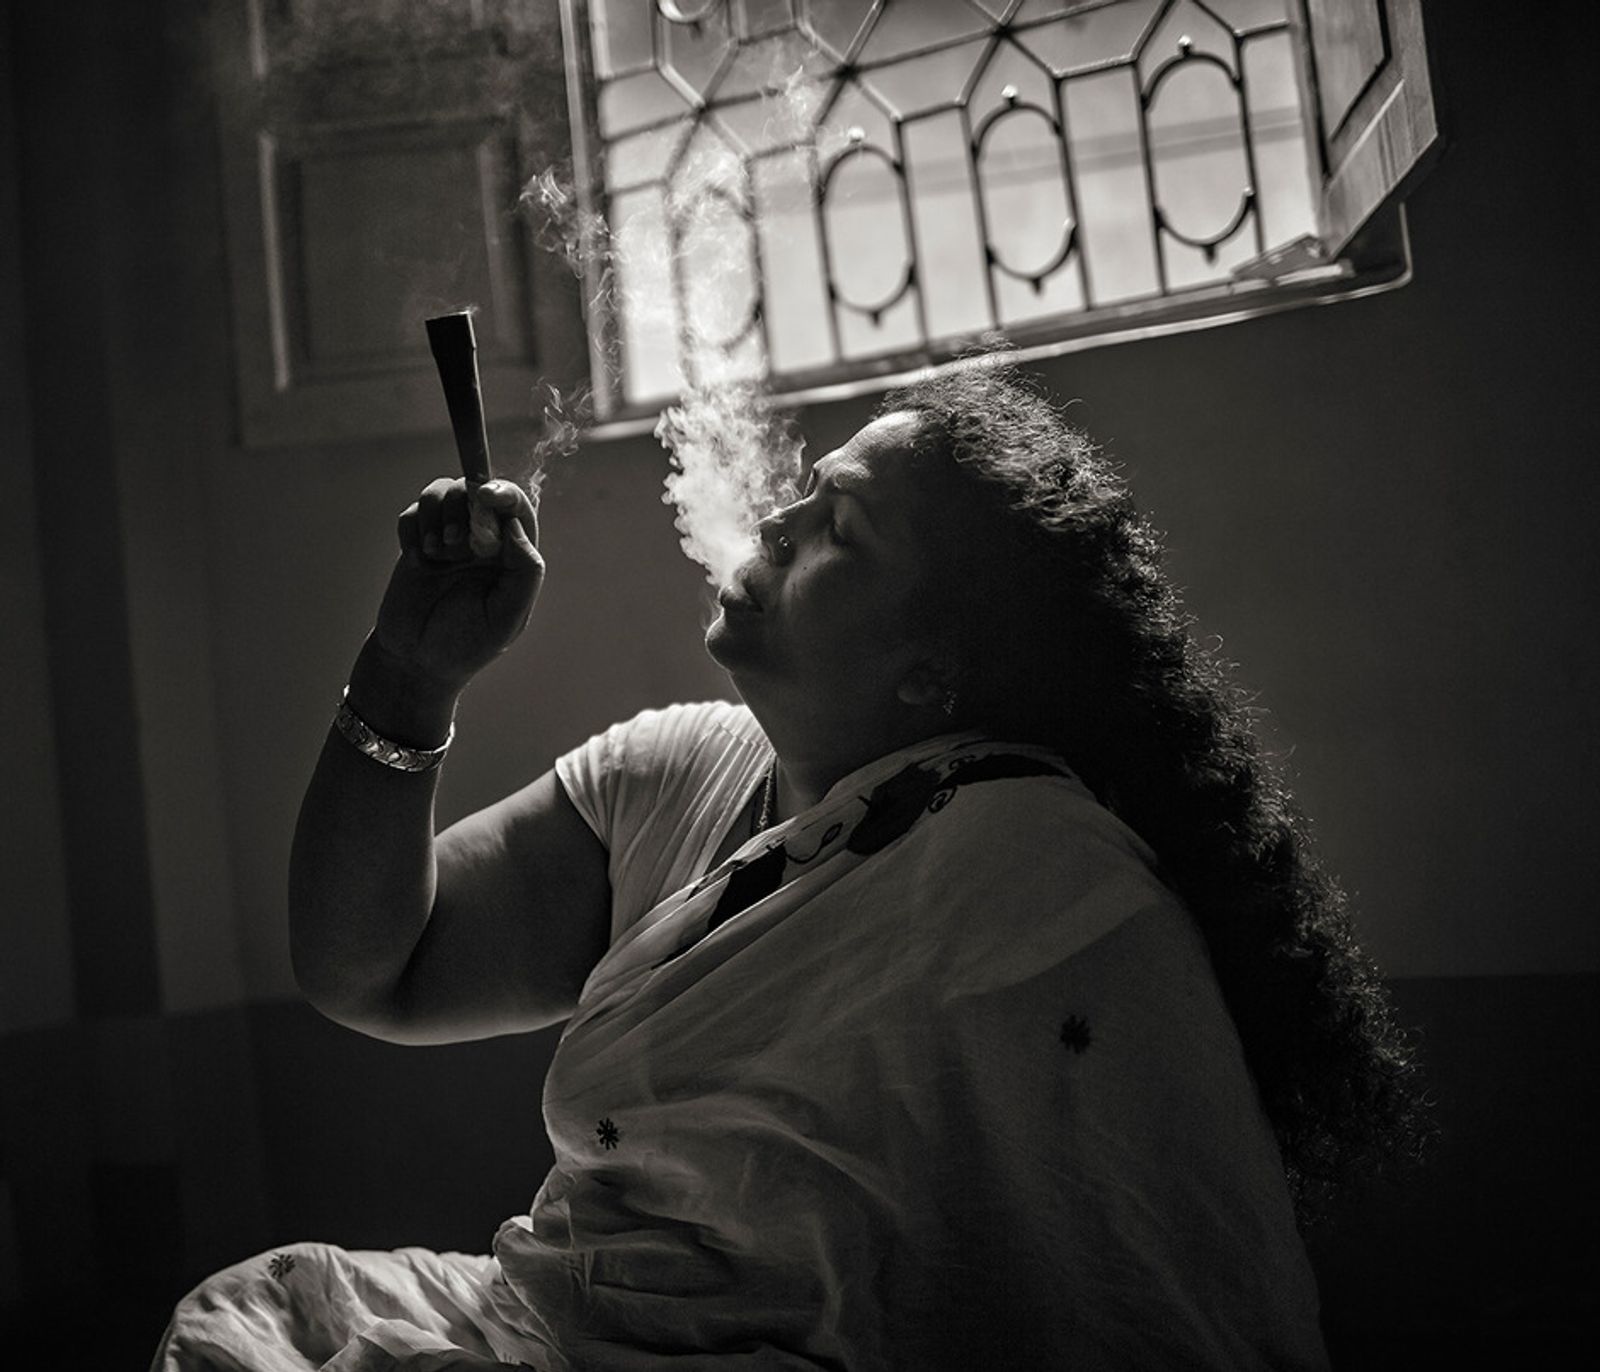 © Shahria Sharmin - Image from the Call me Heena photography project